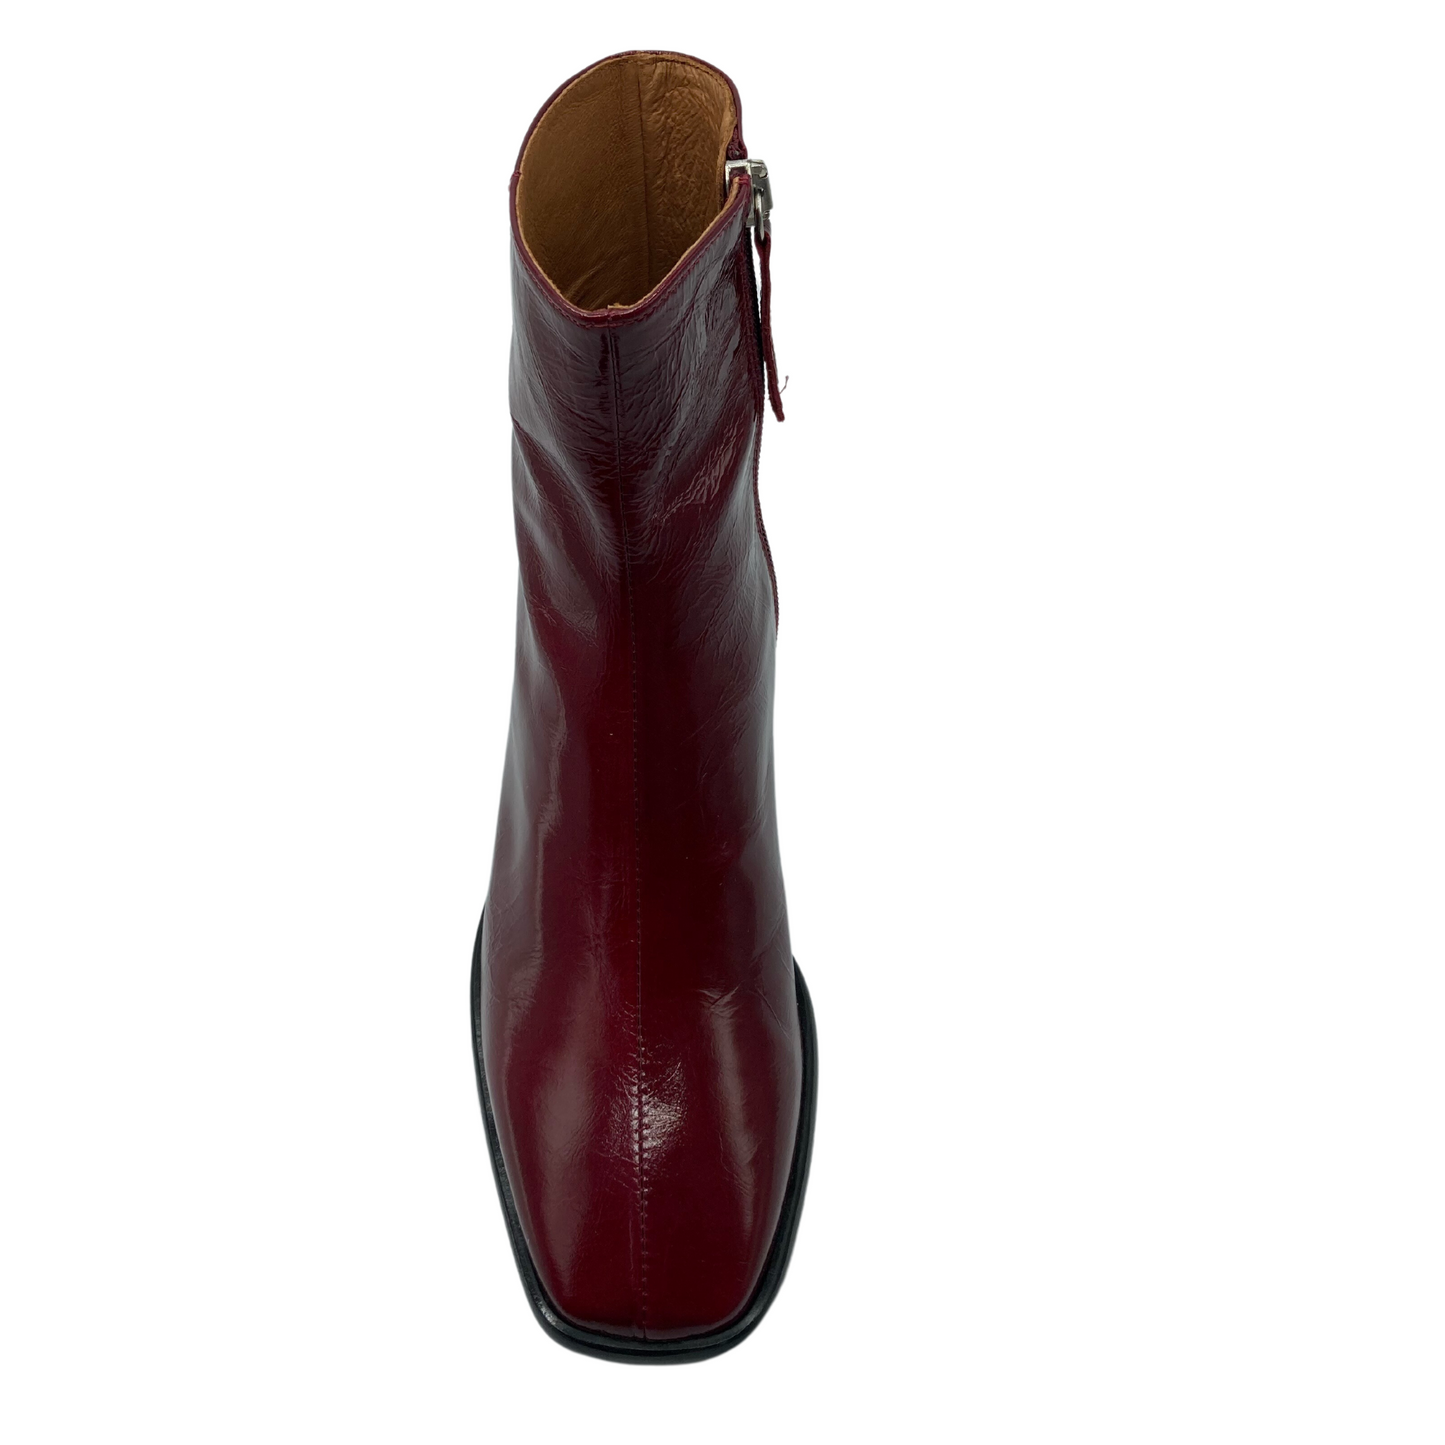 Top facing view of red leather boot with square toe and side zipper closure